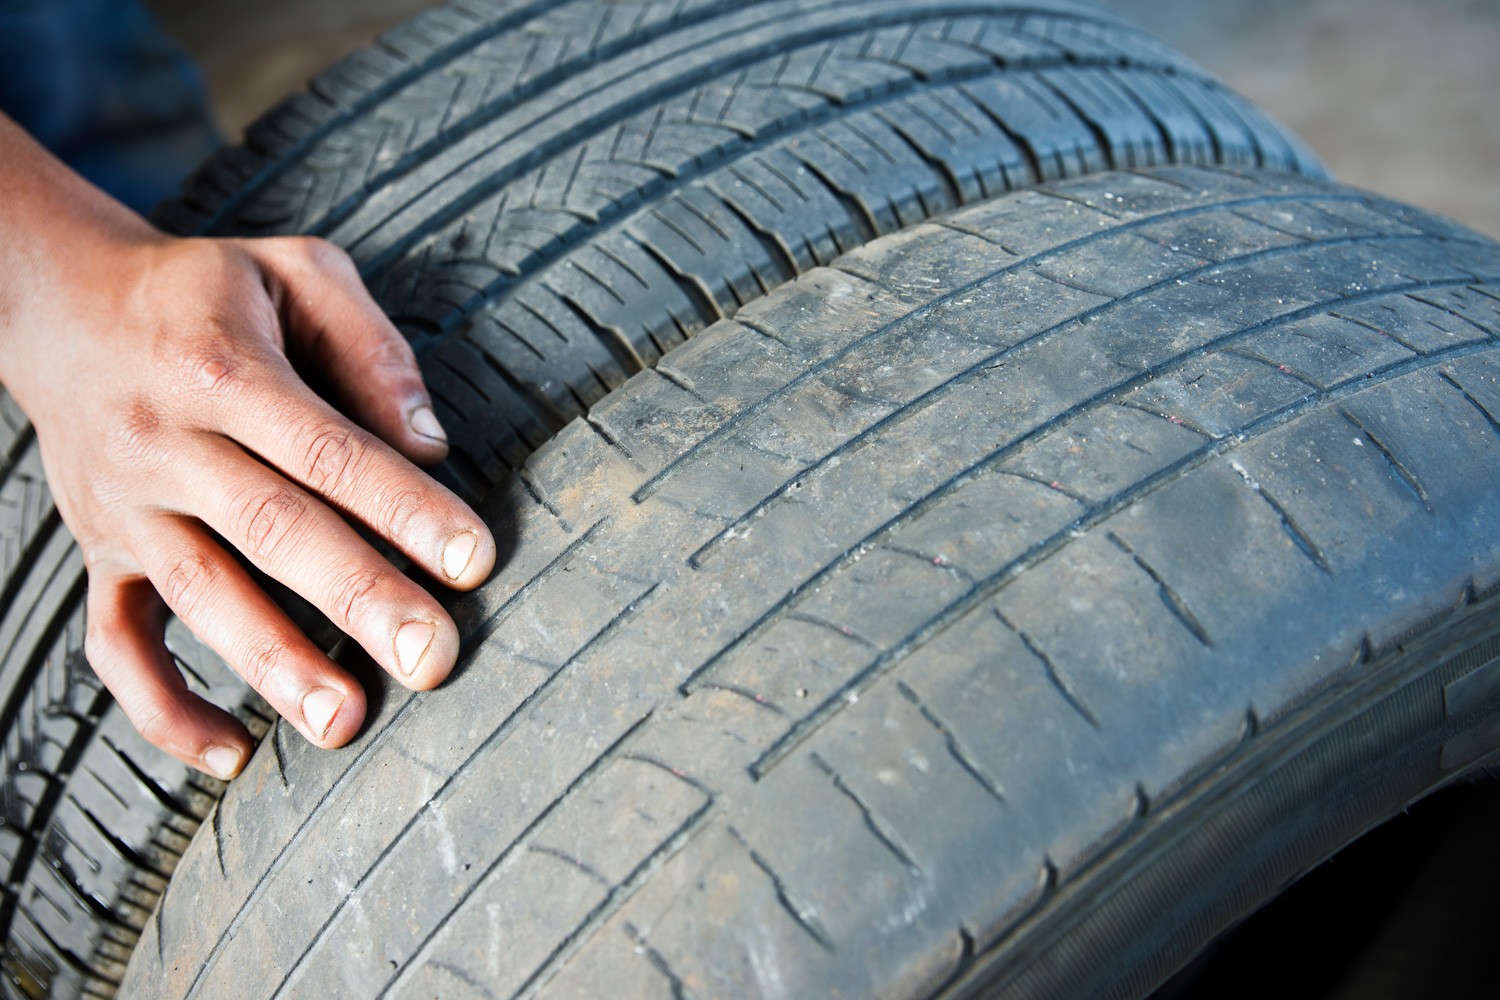 A photograph comparing a dangerously worn tire beside a newer tire with acceptable tread.